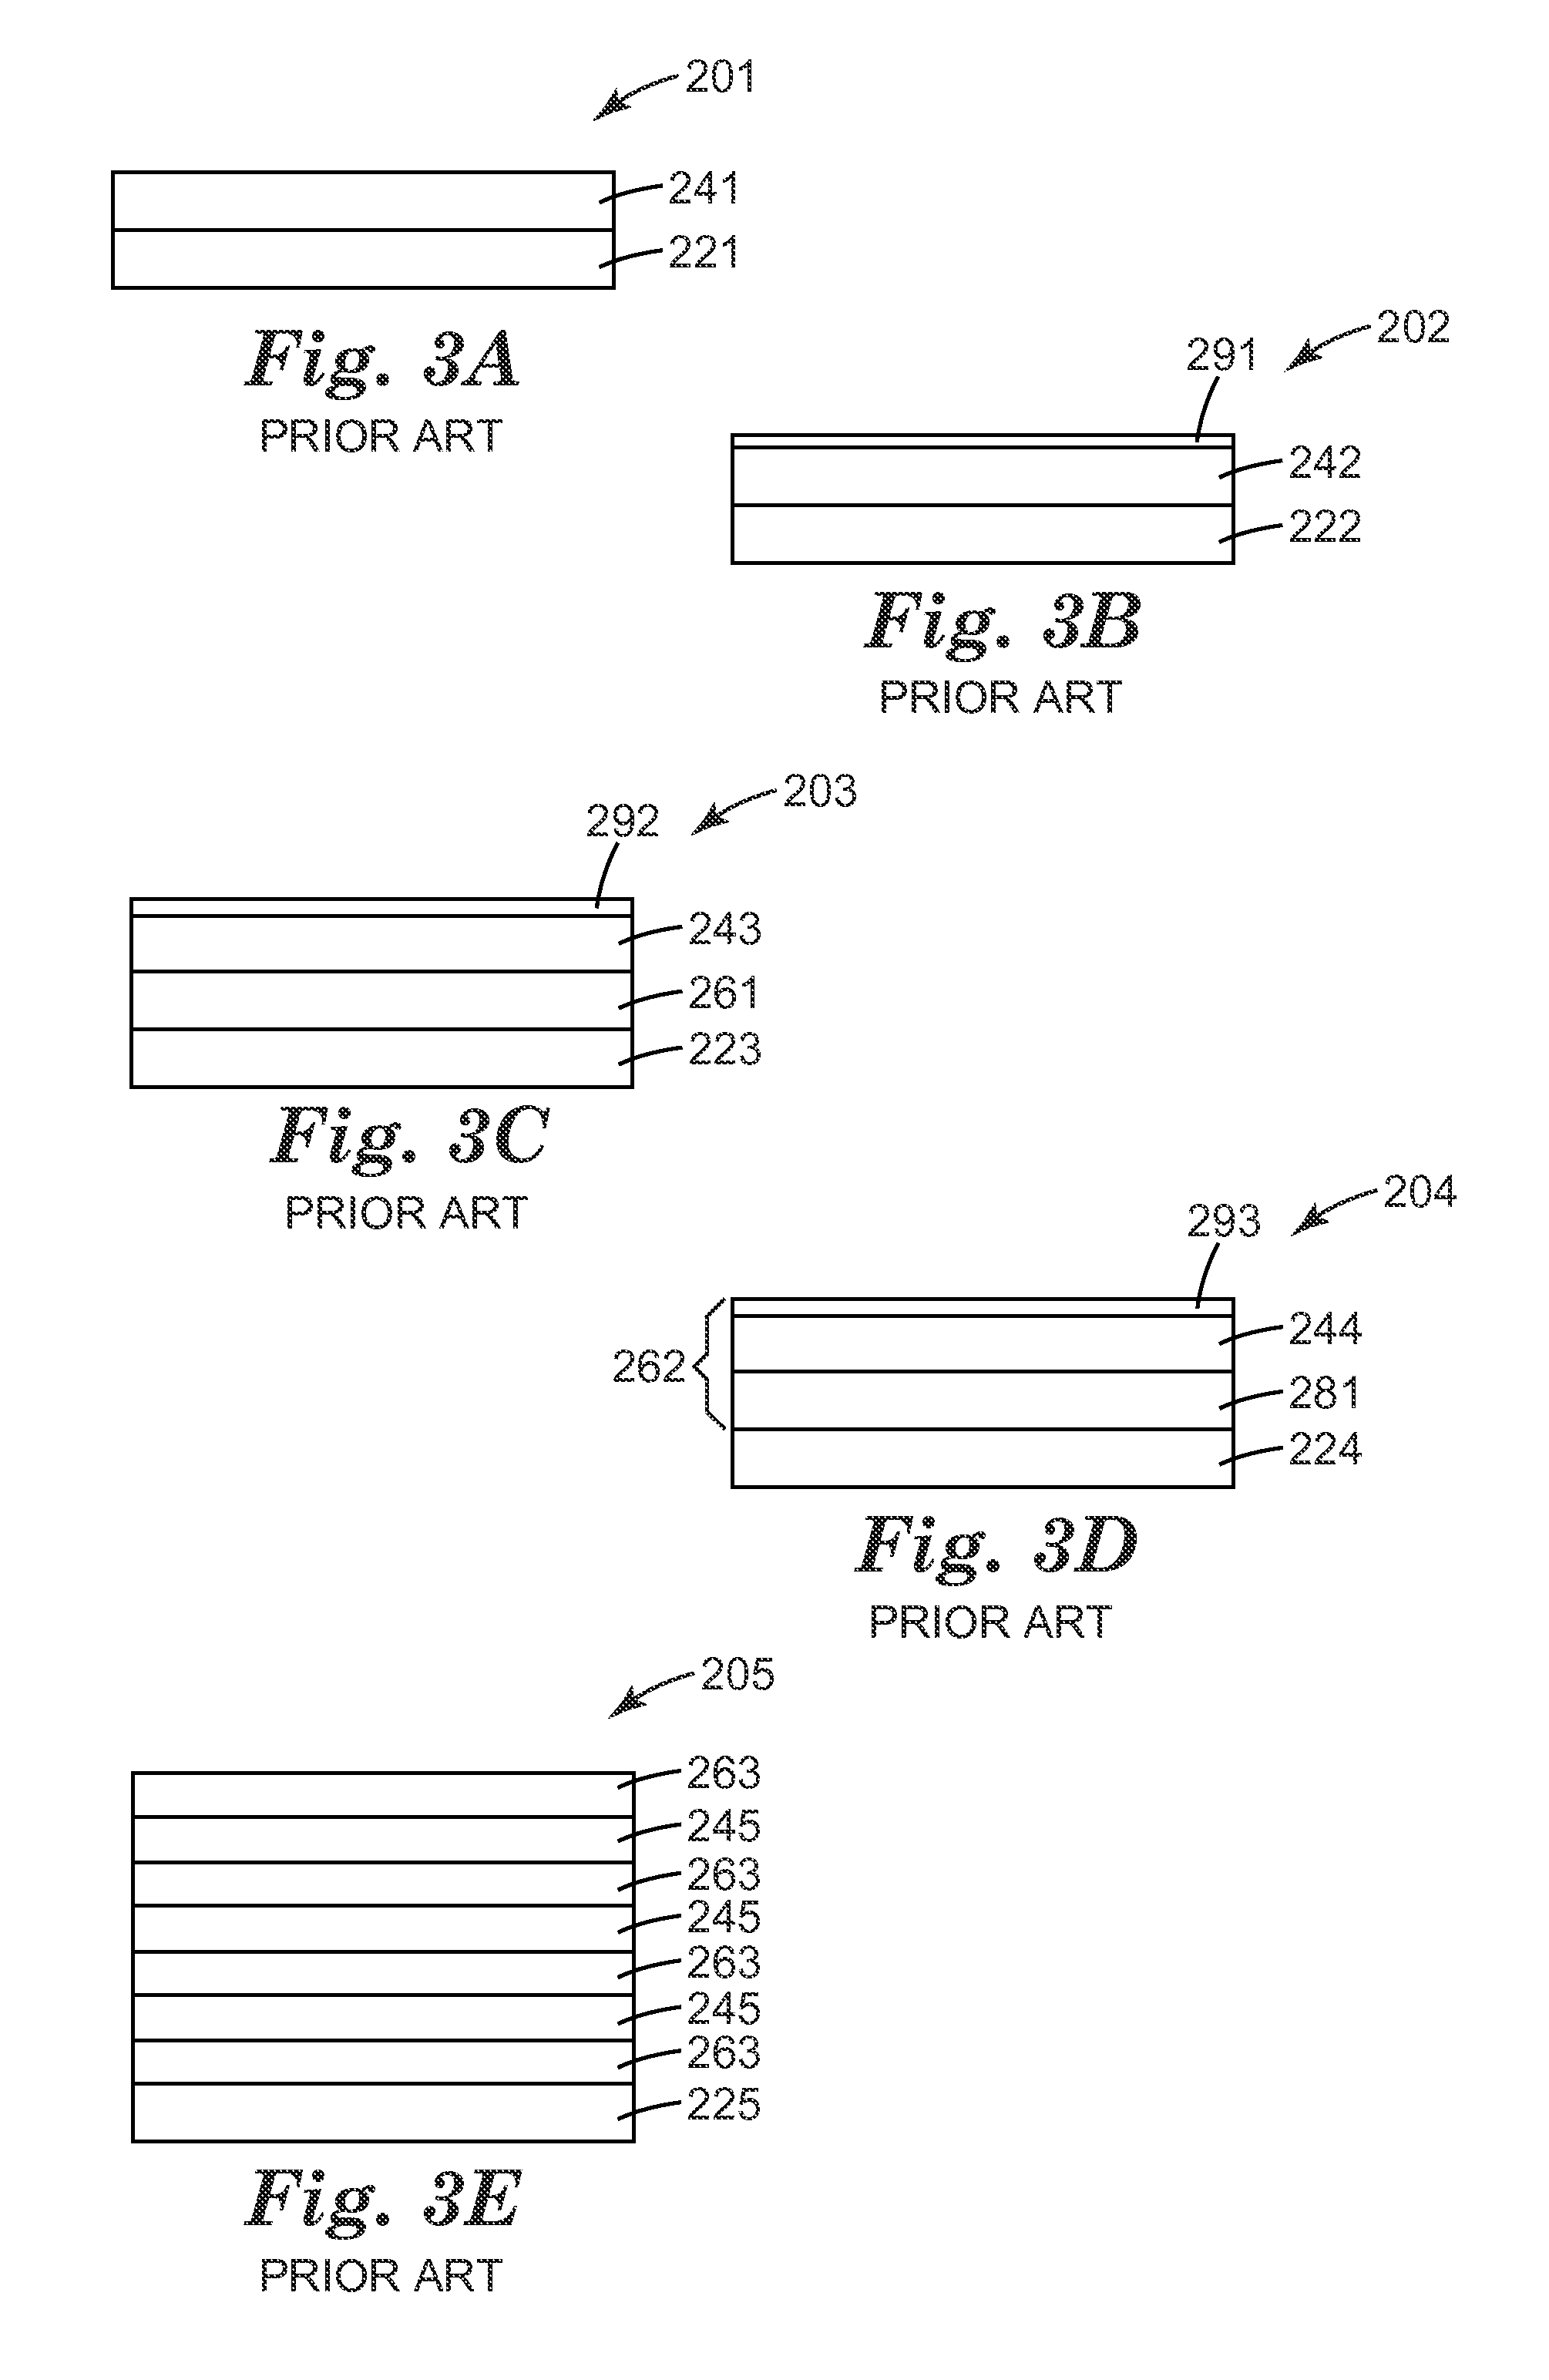 Lightning protection sheet with patterned conductor